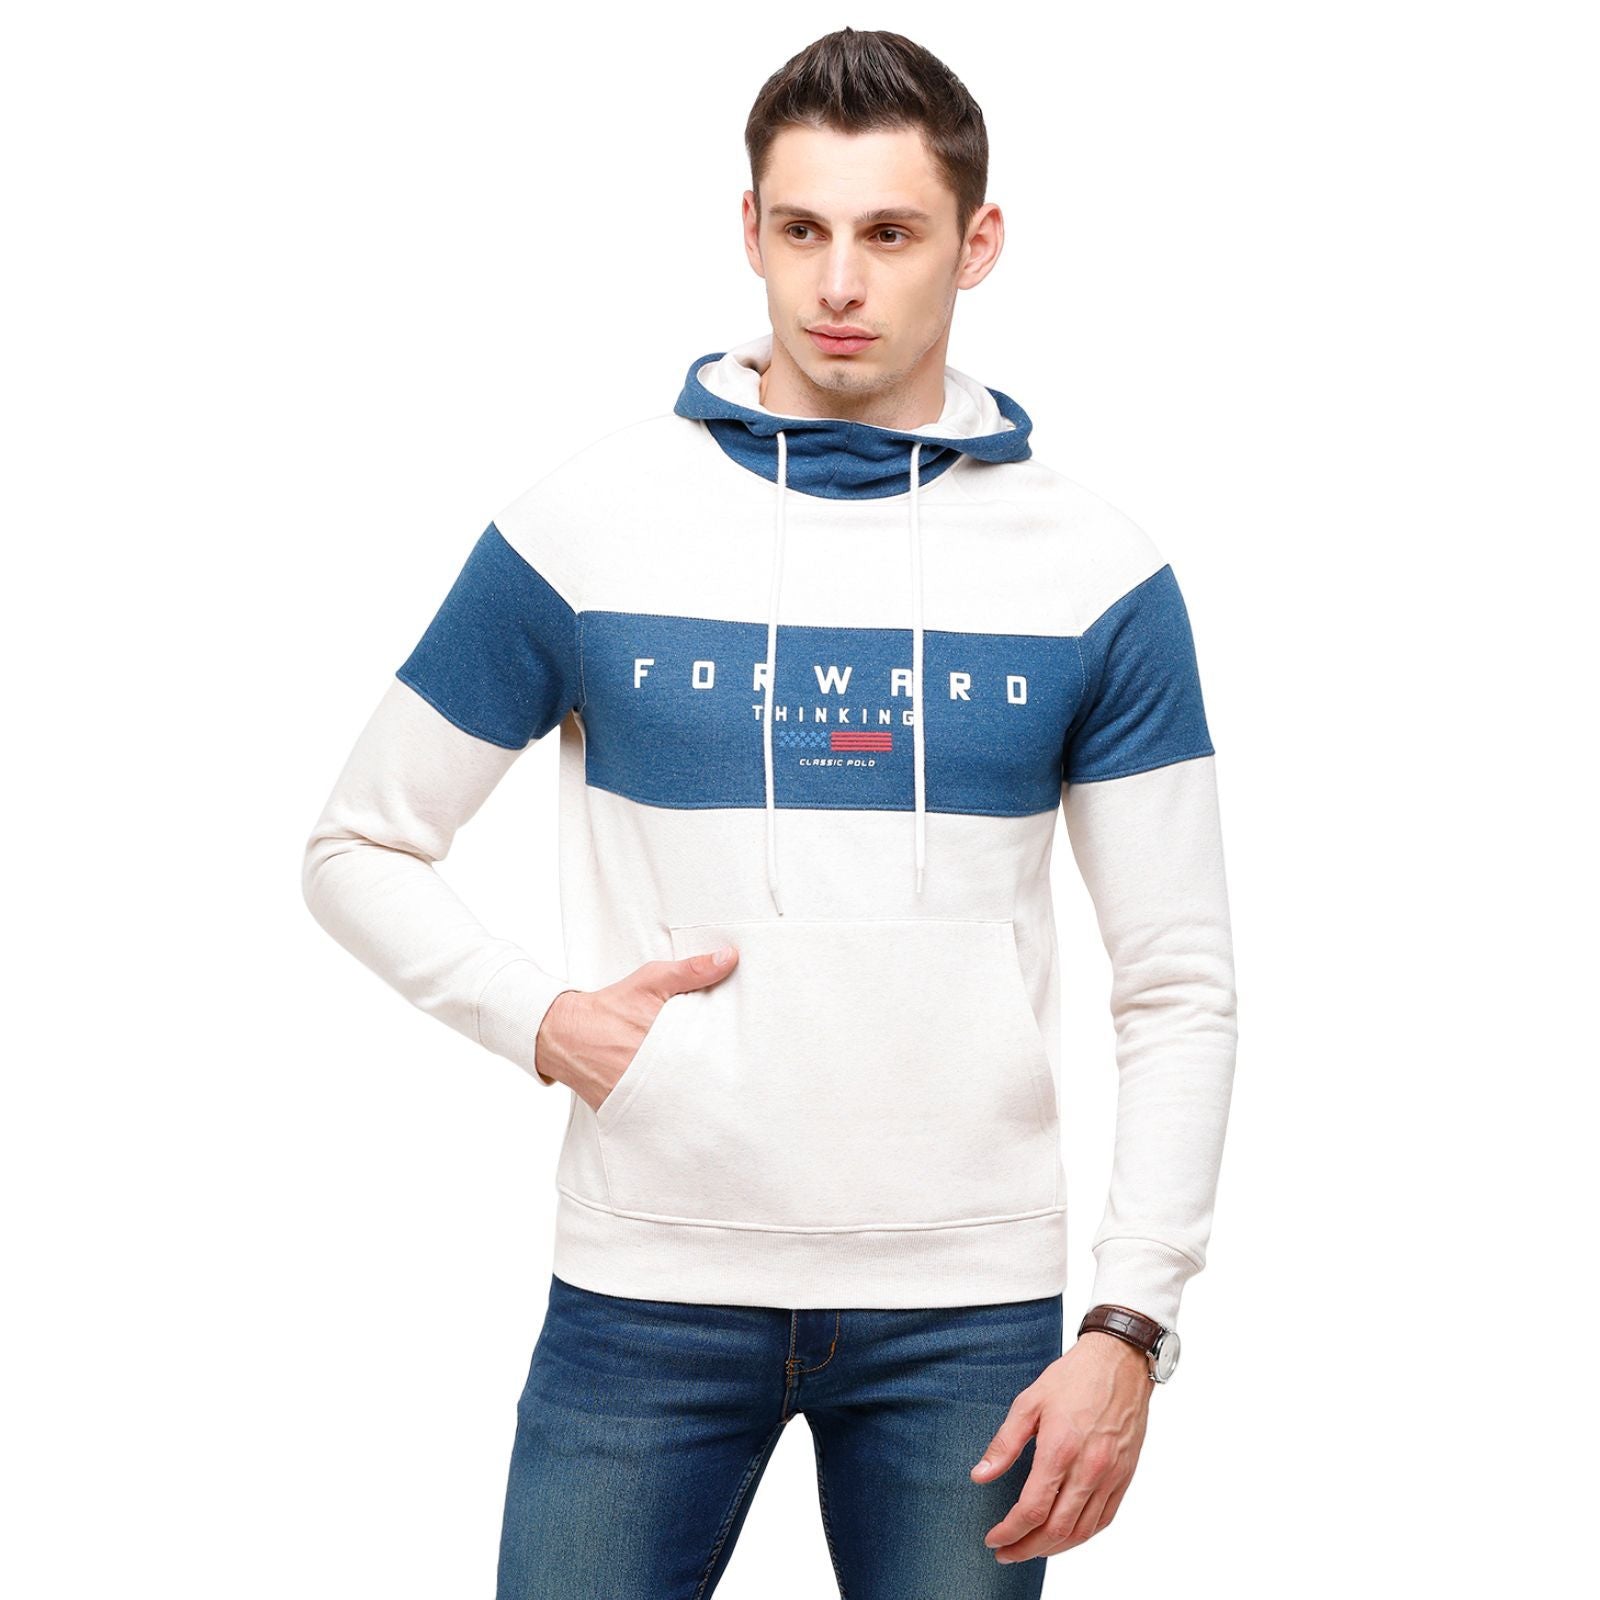 Classic Polo Men's Printed Full Sleeve White & Blue Hood Sweat Shirt - CPSS - 332A Sweat Shirts Classic Polo 